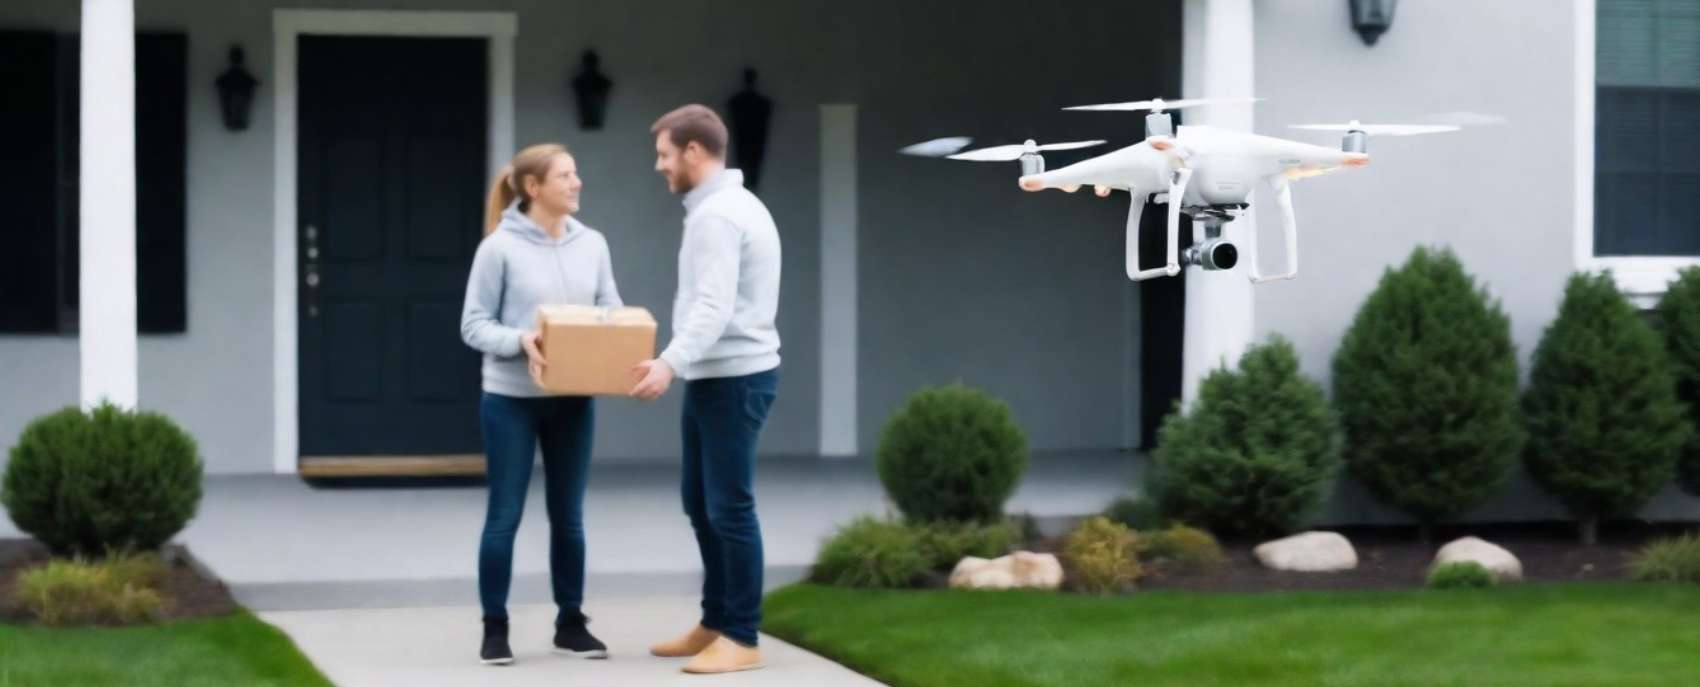 Pharmacy Drone Delivery to Home